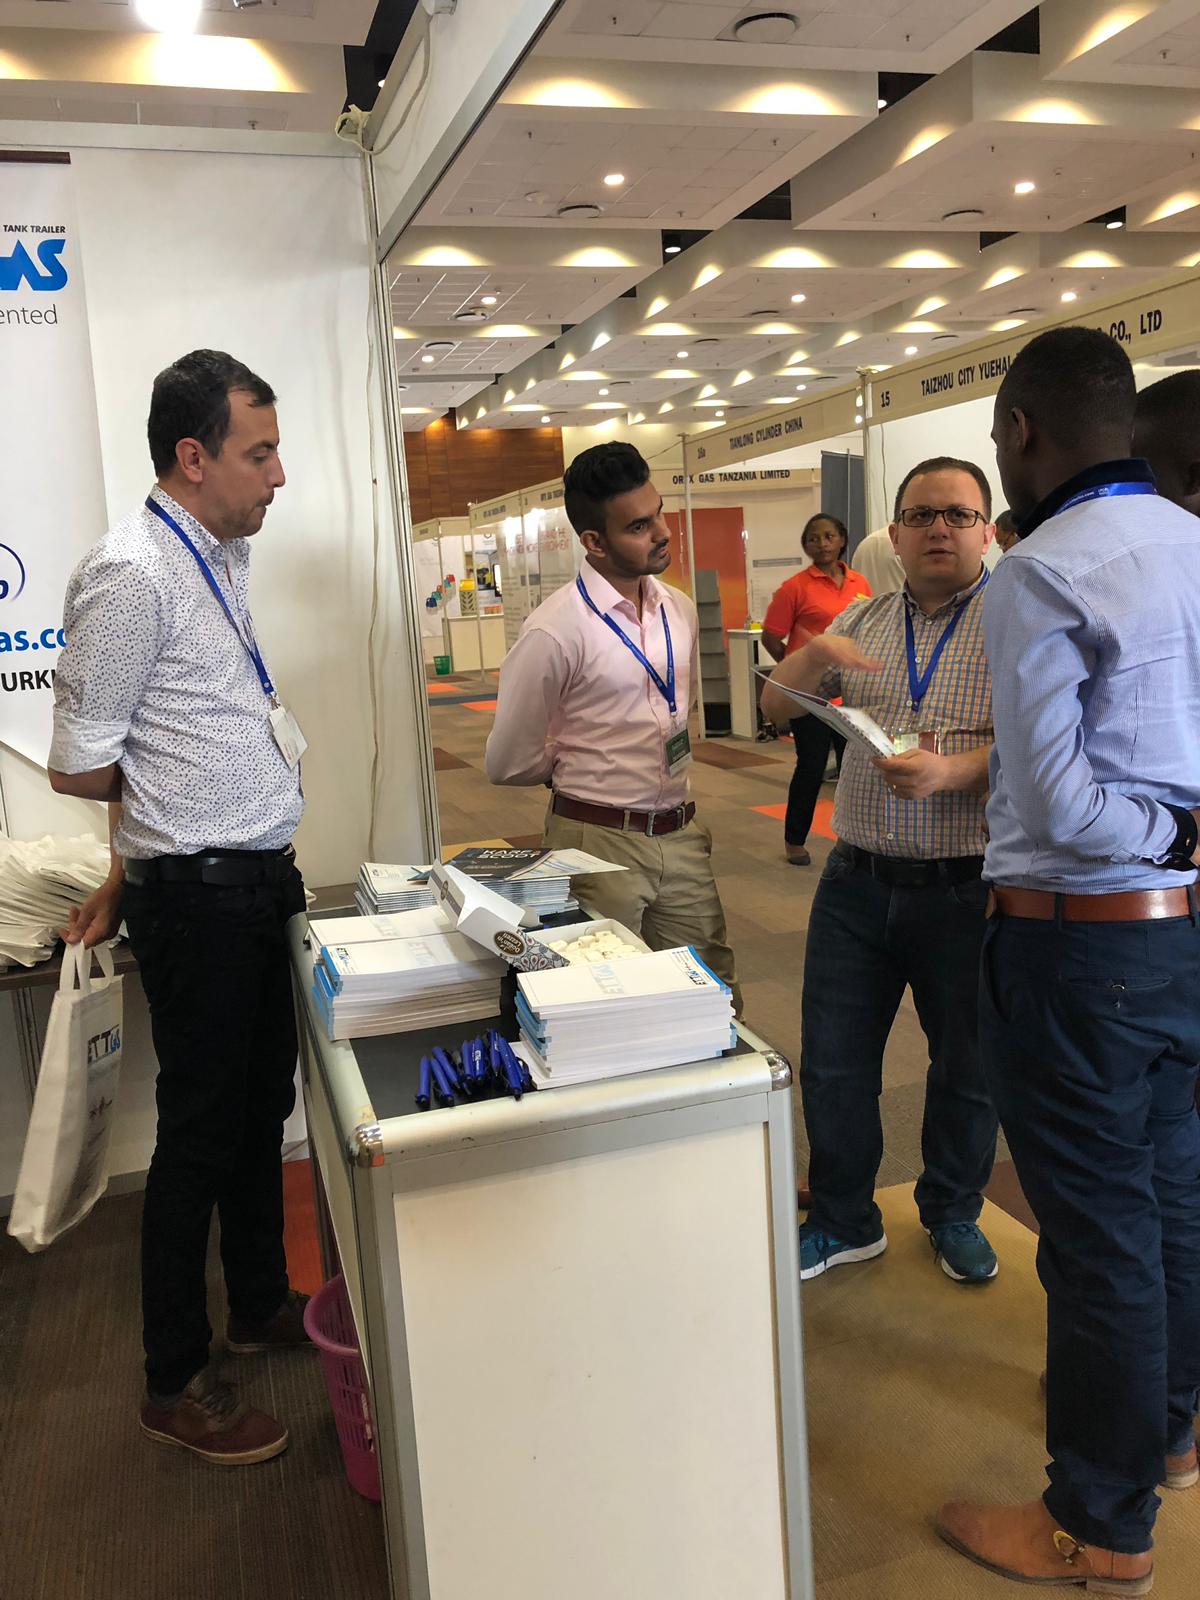 We attended the Lpg Summit fair in Tanzania on 3-4 July